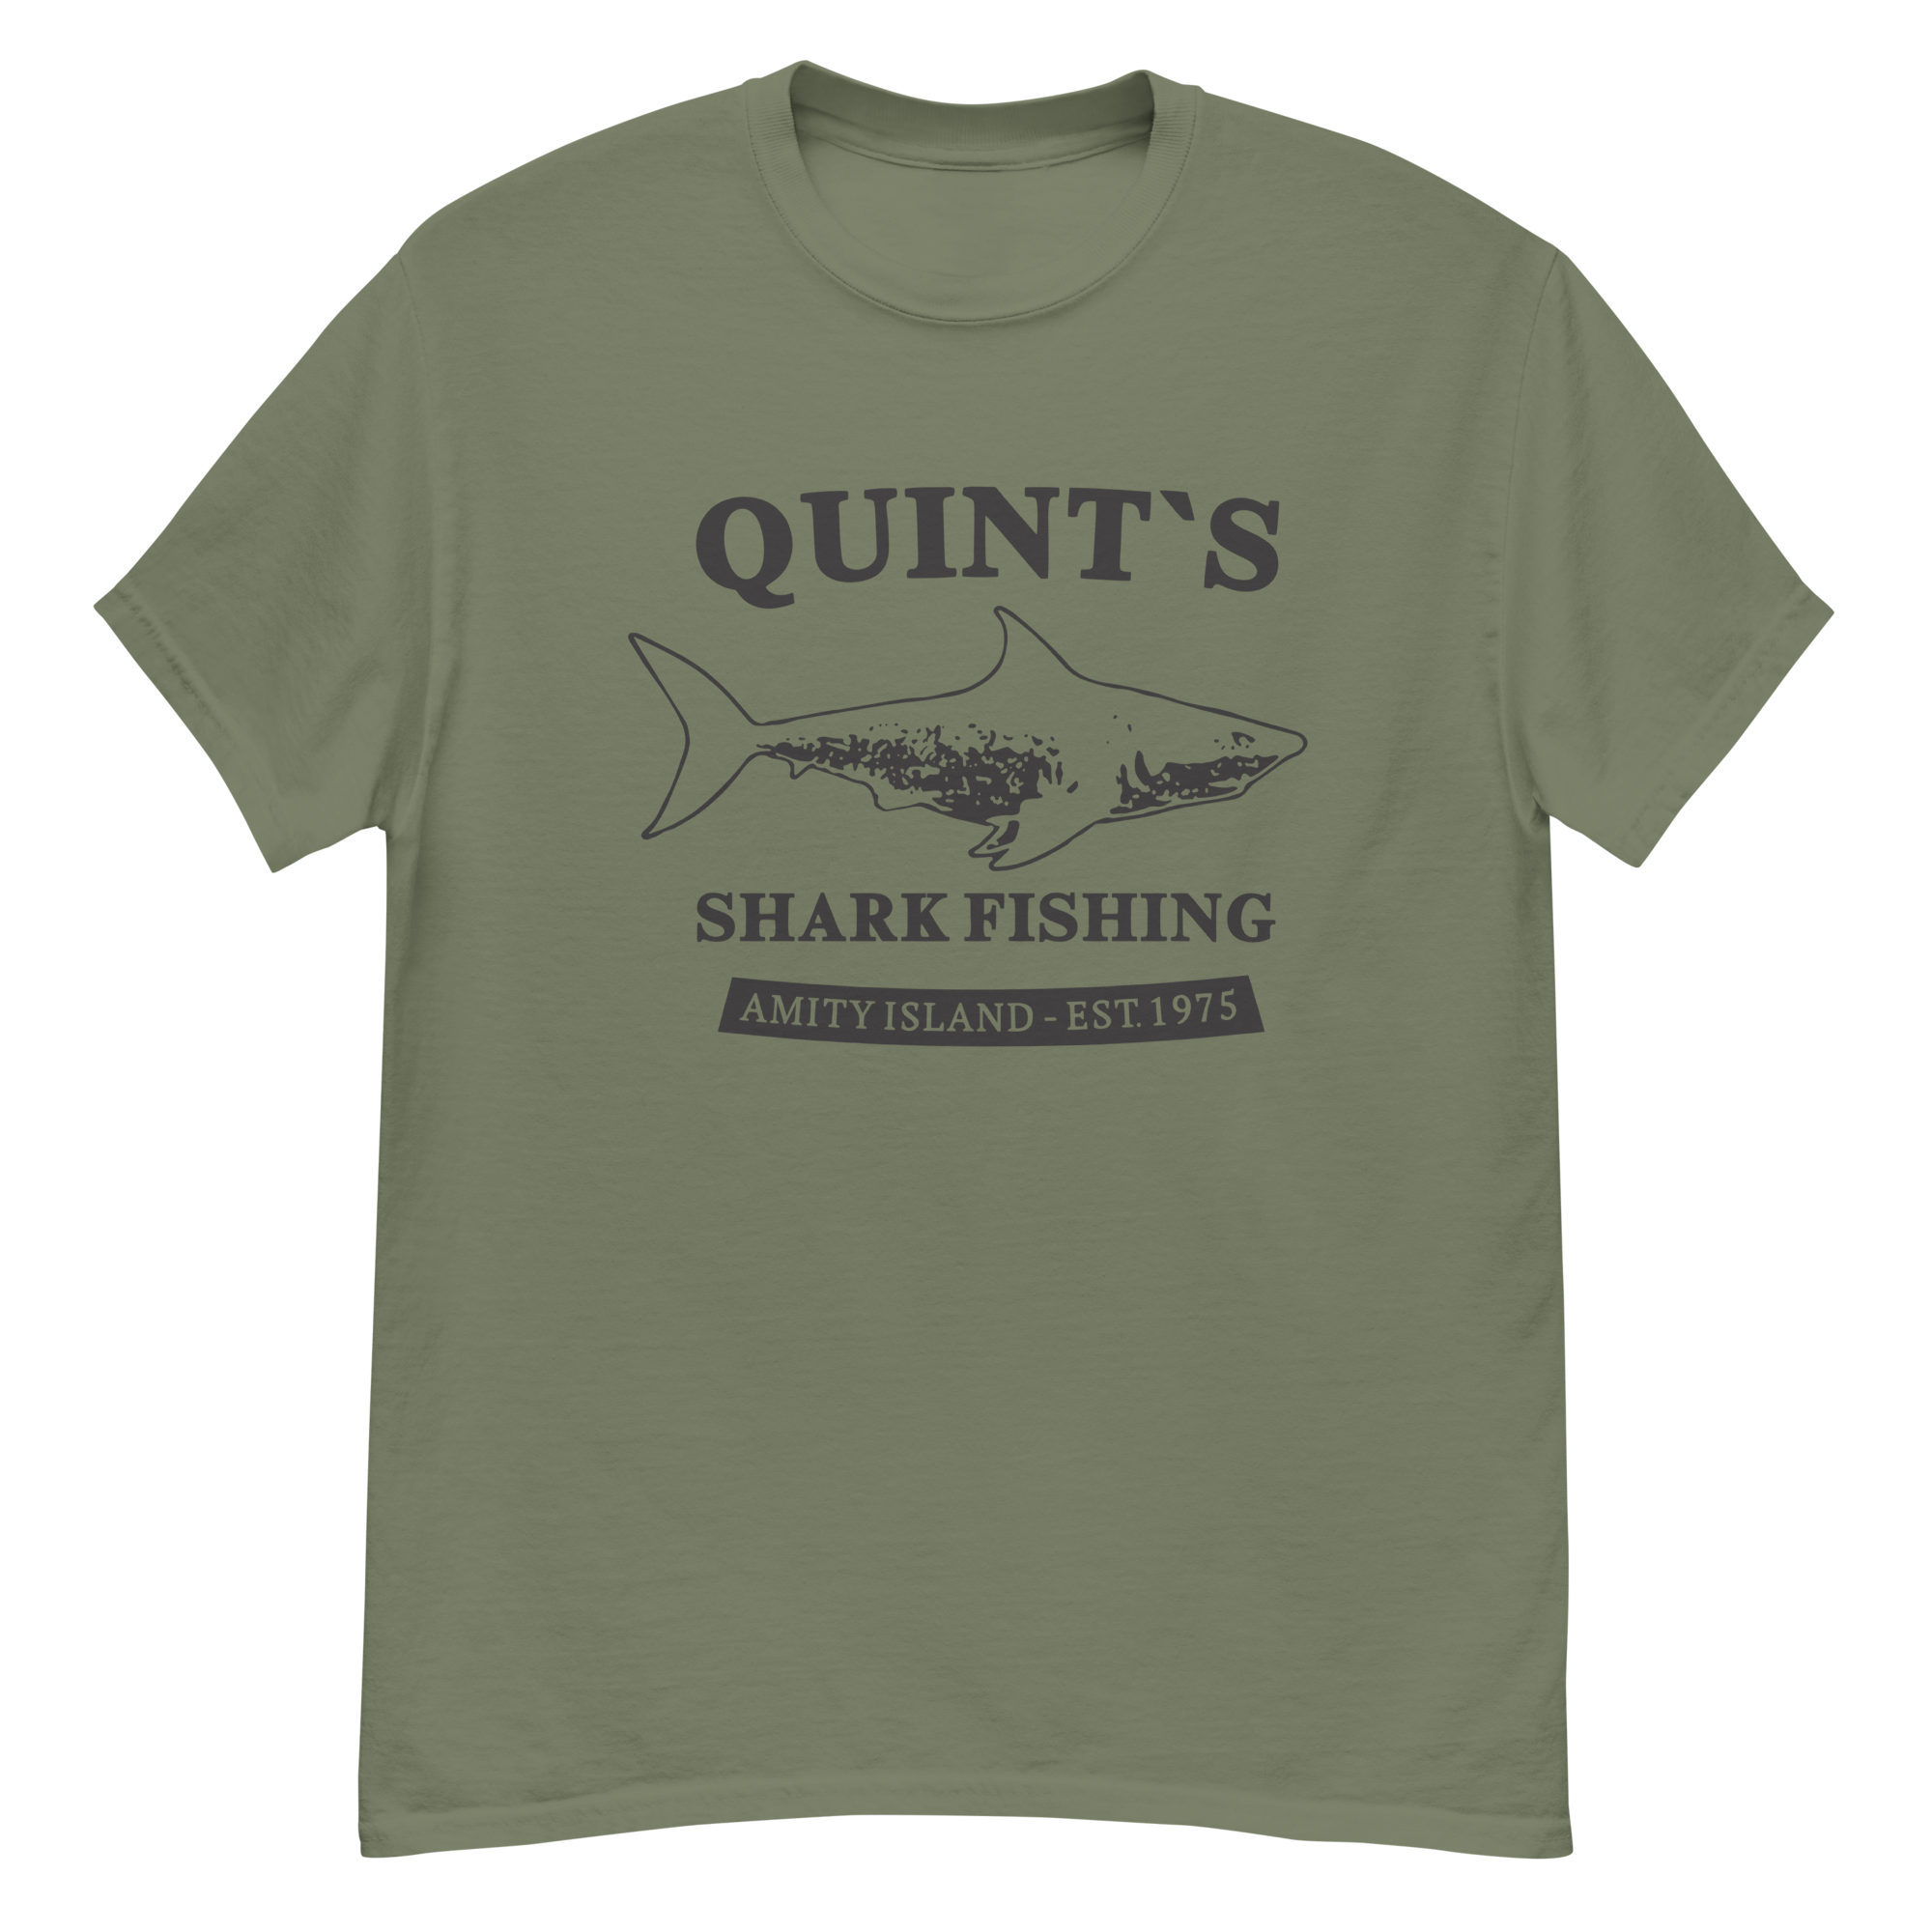 Dufresne & Redding Fishing Charters Tee – Super 70s Sports